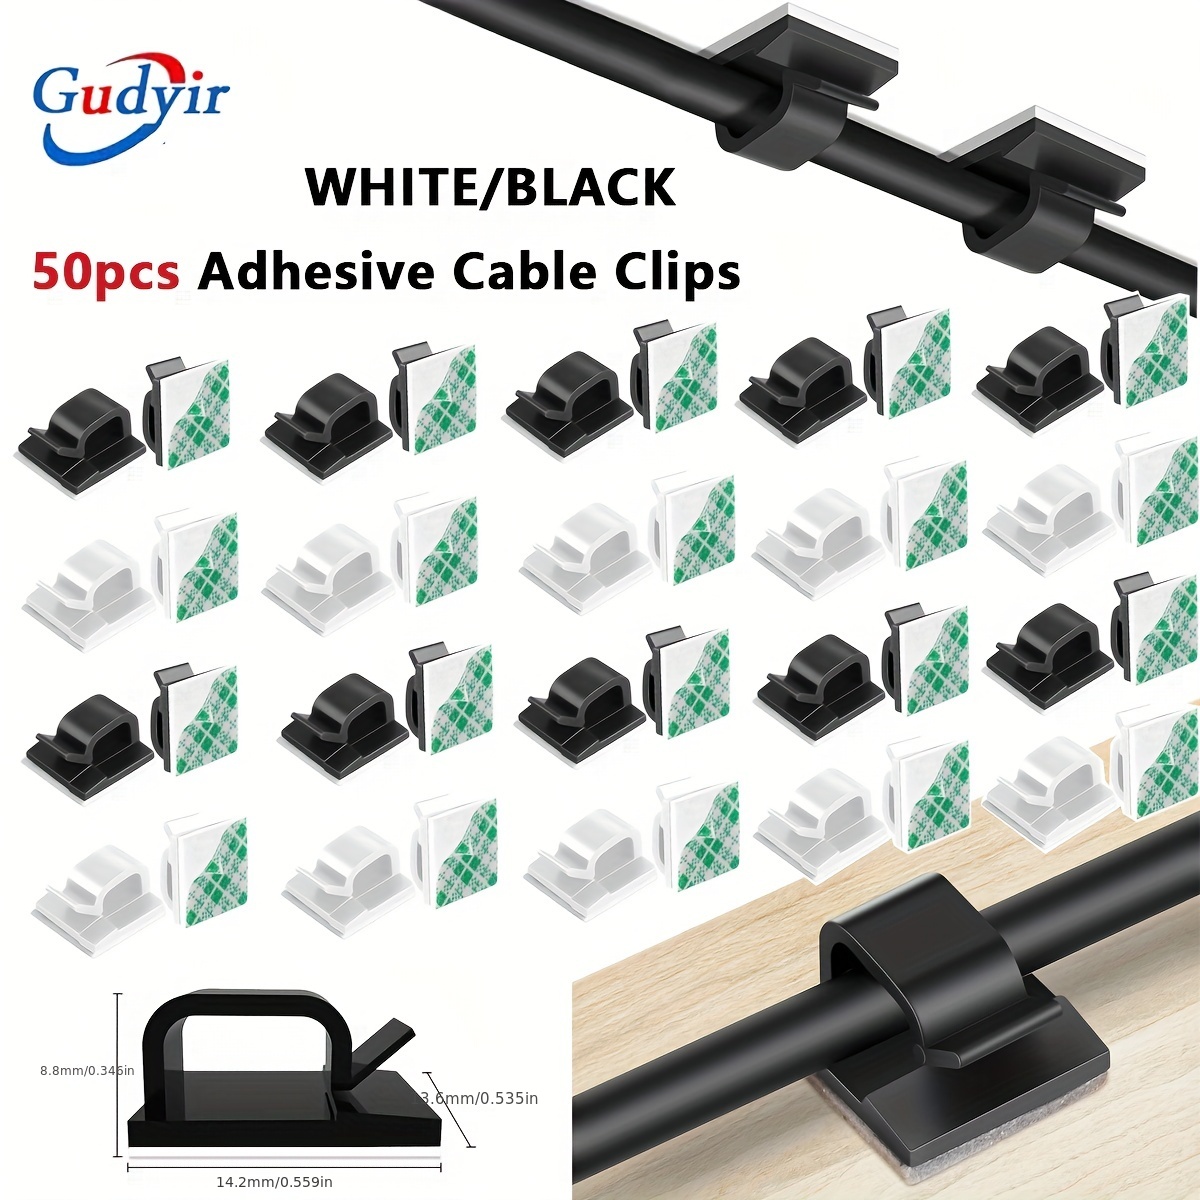 50pcs Adhesive Cable Clips - Upgrade Your Cable Management & Keep Wires  Securely Organized!